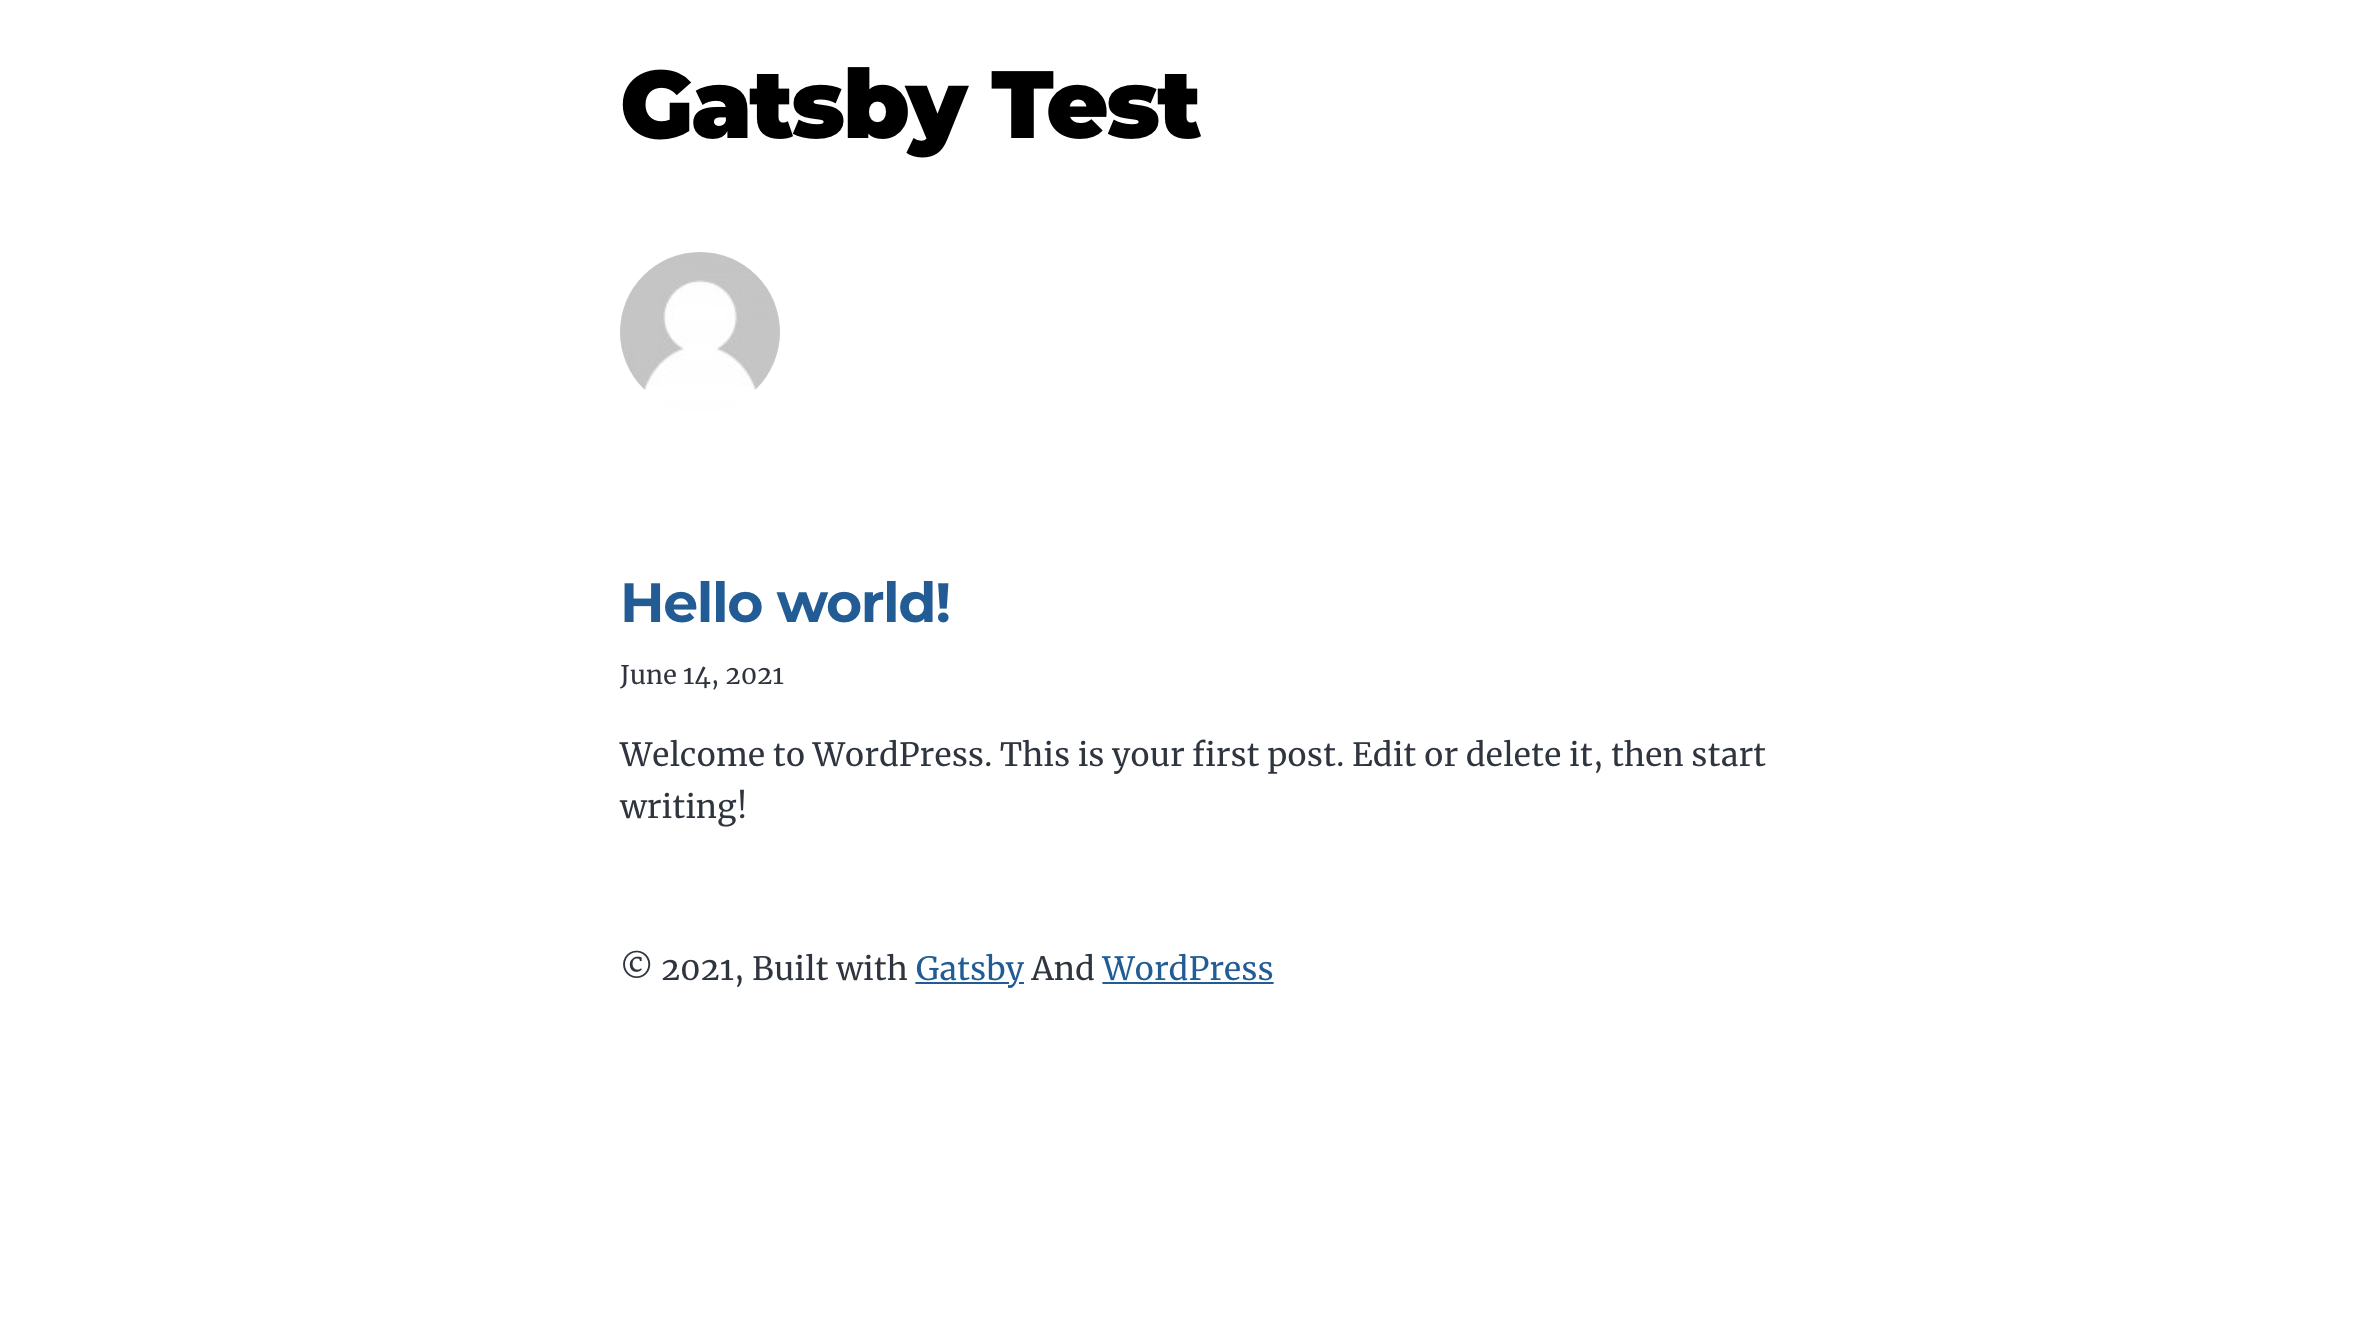 Gatsby site entitled "Gatsby Test" with one "Hello World" blog post